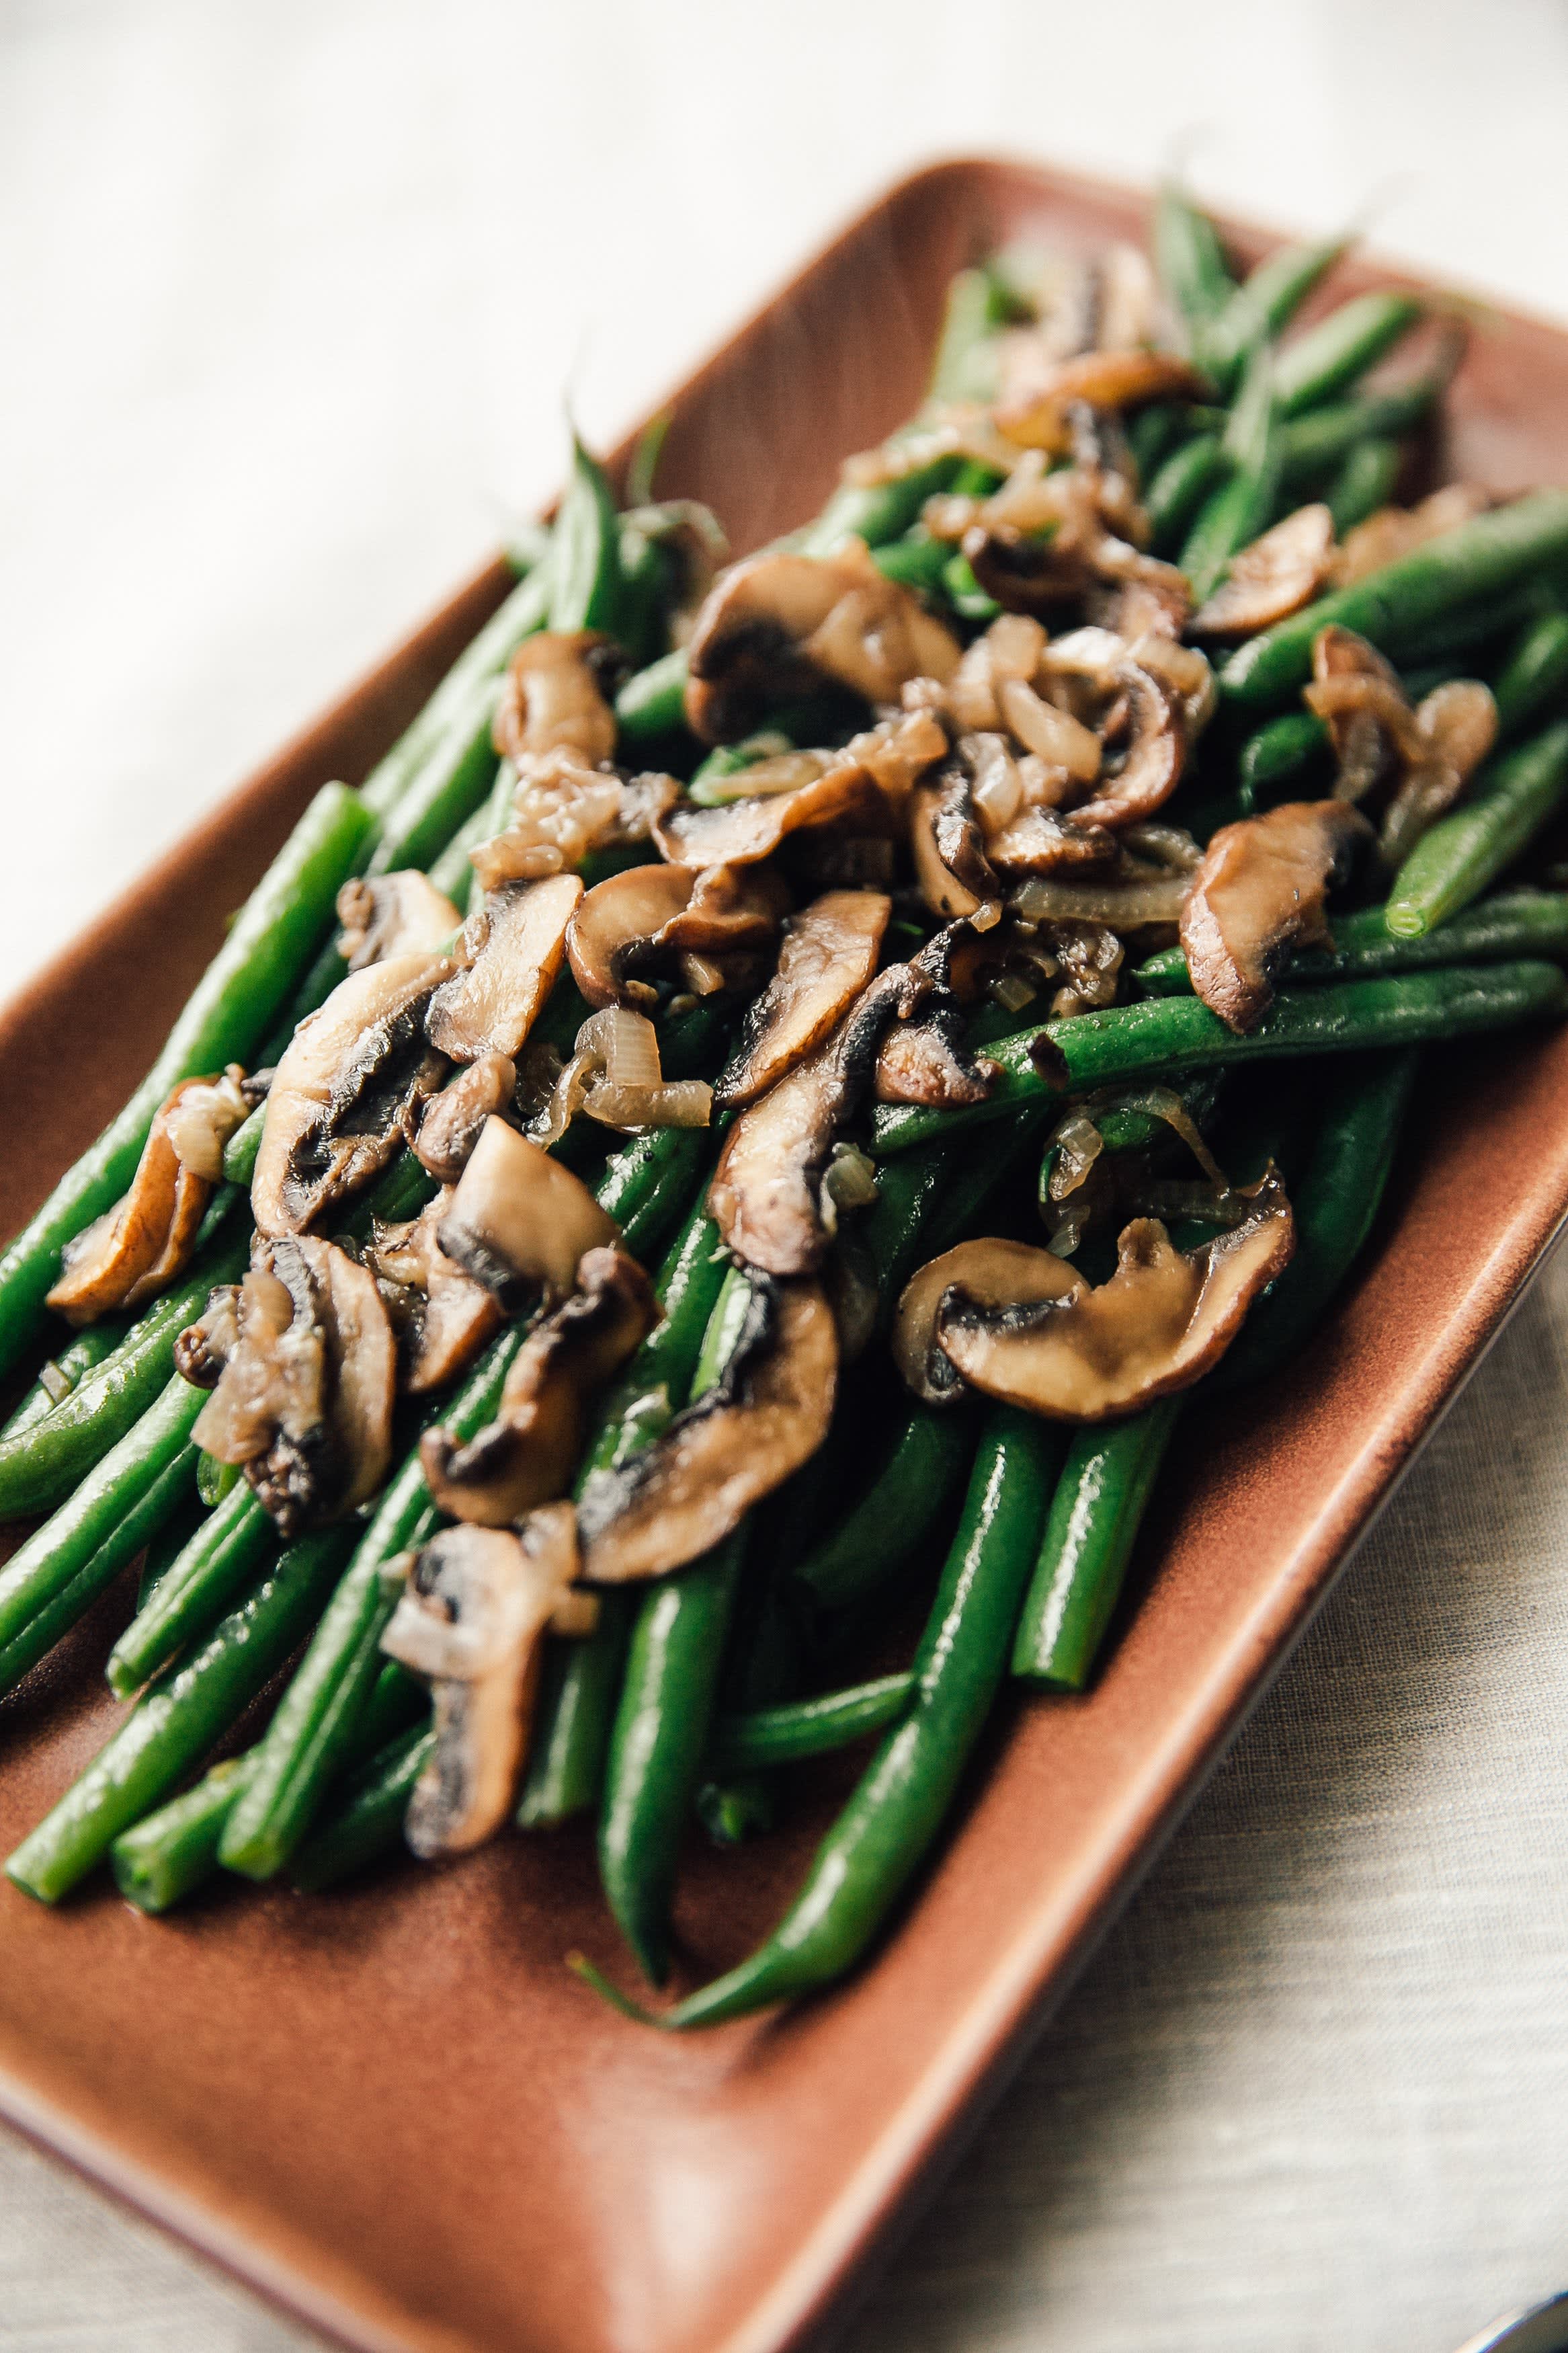 Recipe: Stovetop Steam-Fried Green Beans and Mushrooms | Kitchn